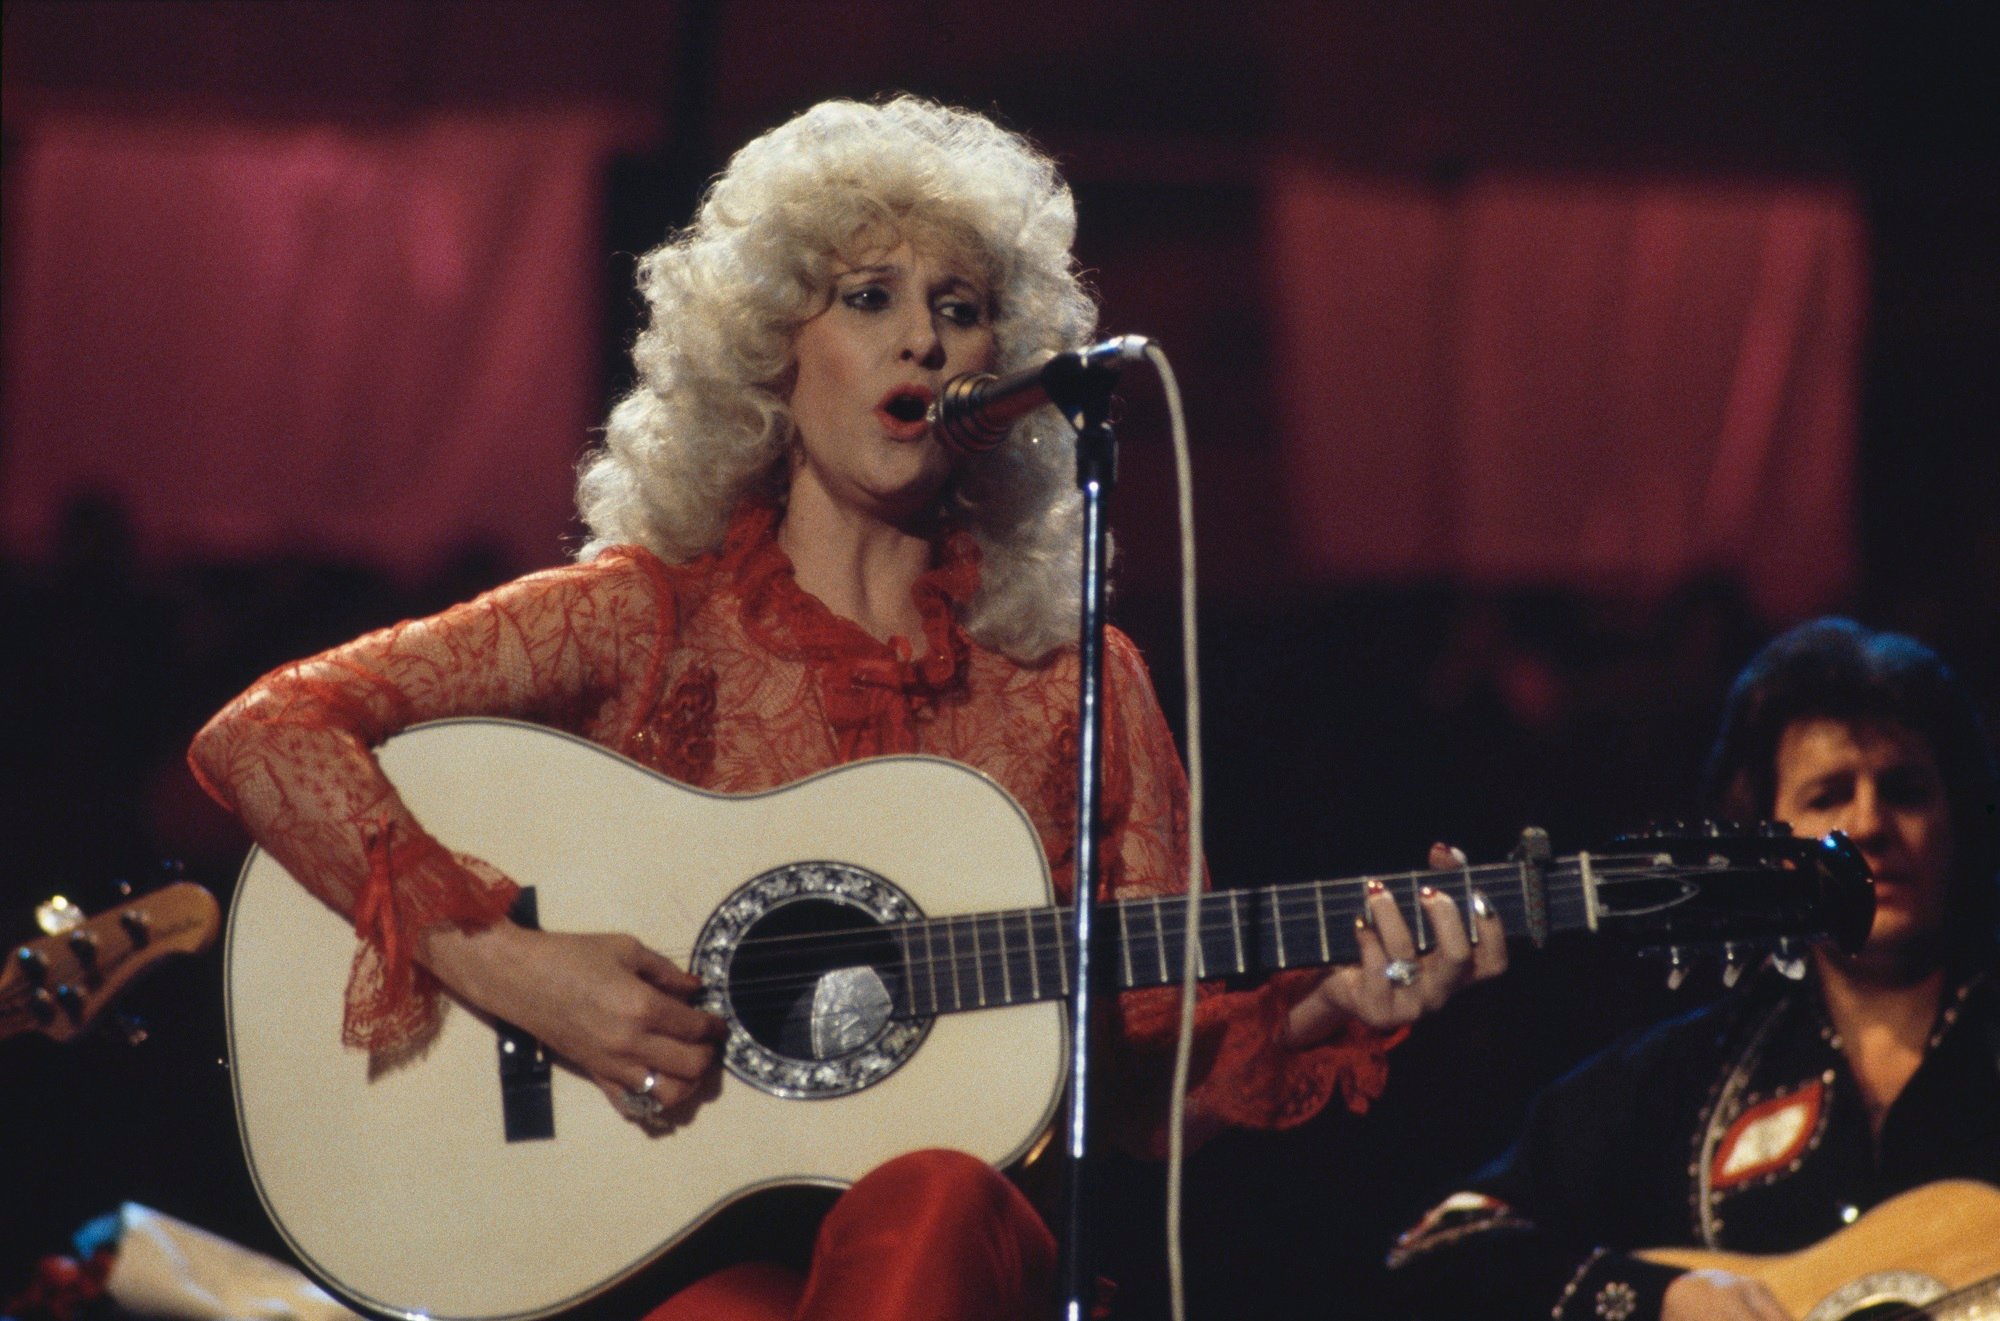 Tammy Wynette sings into a microphone while playing guitar